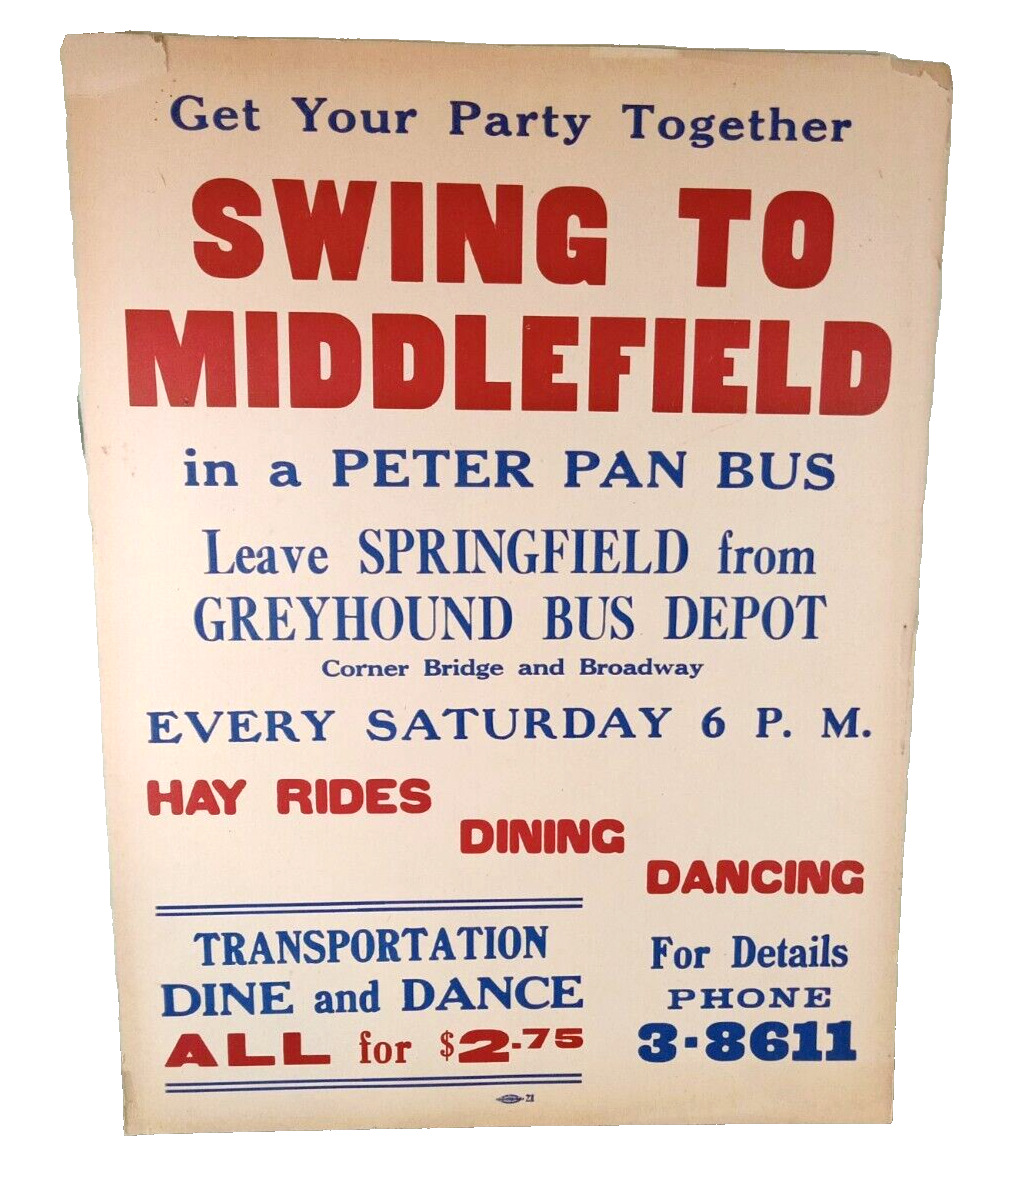 RARE Vintage Cardboard Poster GREYHOUND PETER PAN PARTY BUS Swing to Middlefield